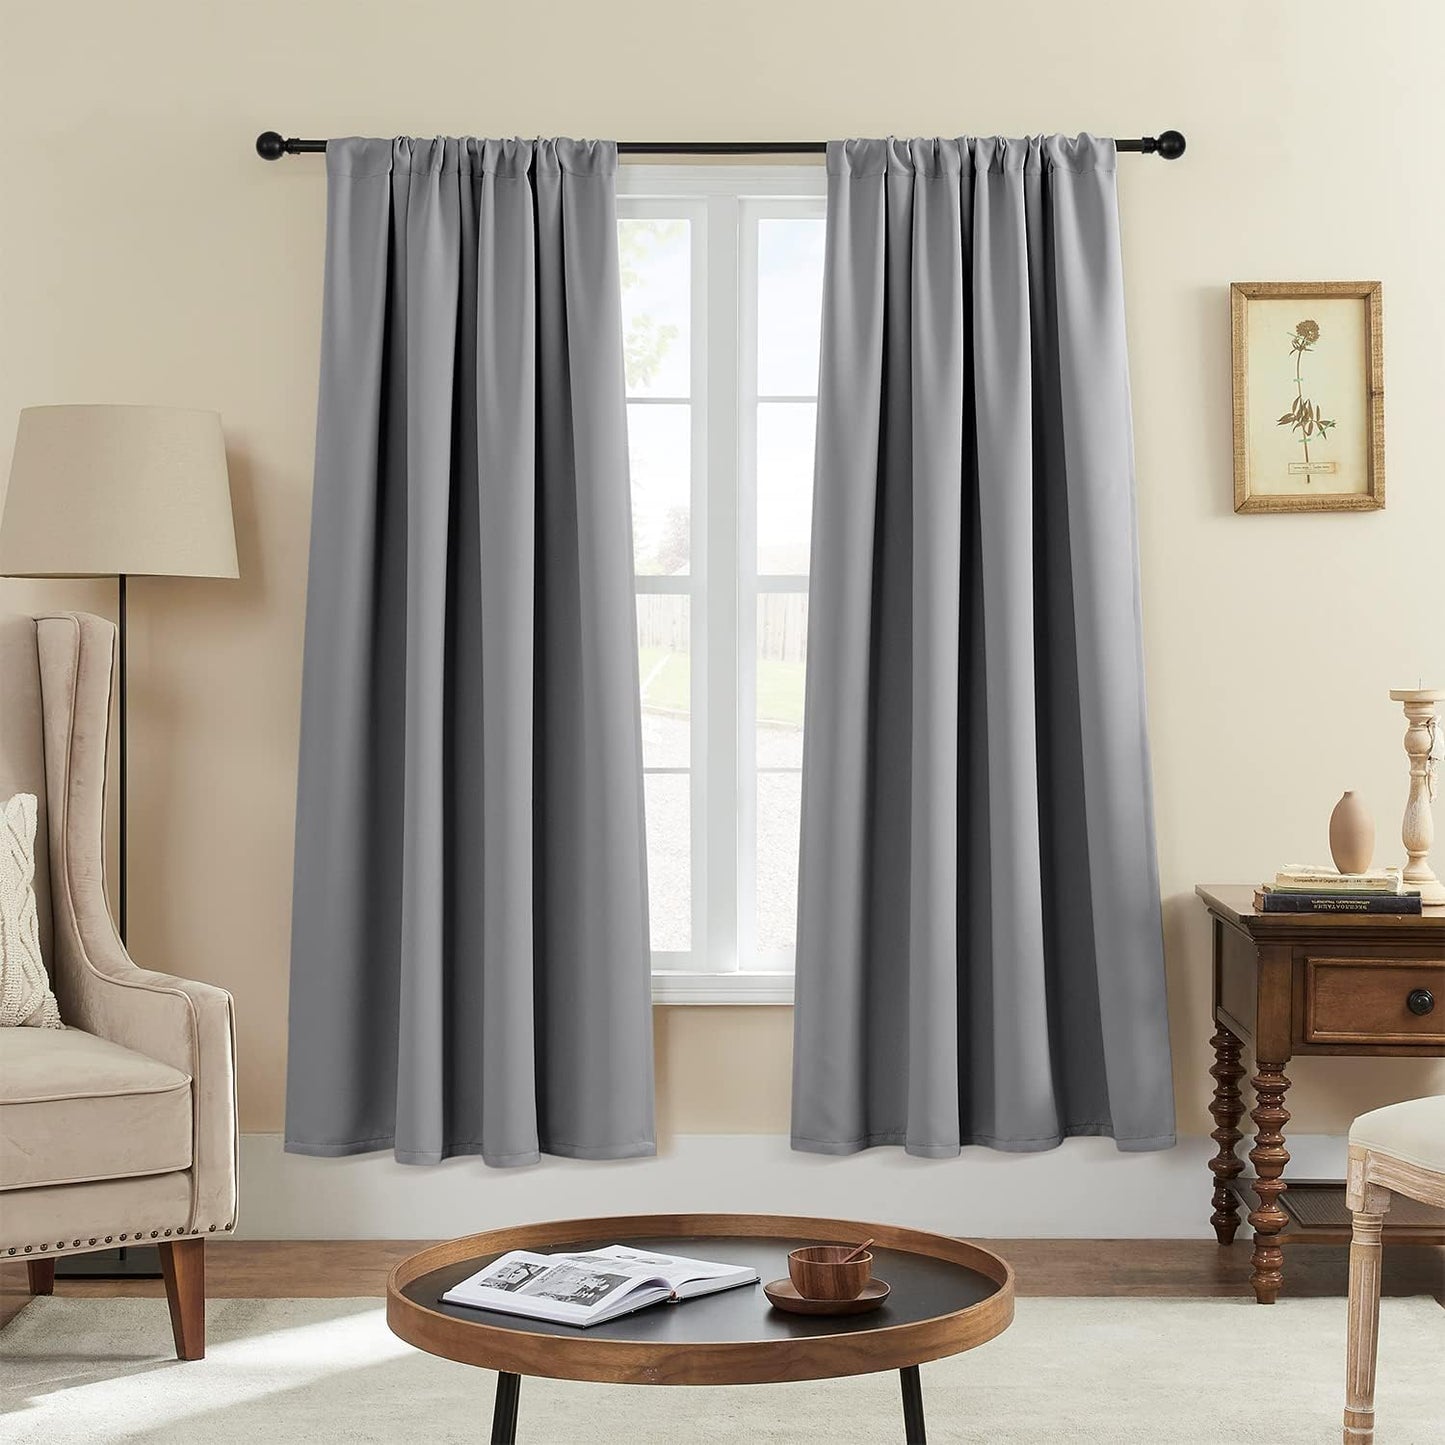 Rutterllow Blackout Curtains for Bedroom, Thermal Insulated Room Darkening Rod Pocket Curtains for Living Room,2 Panels (42X54 Inch, Black)  Rutterllow Dove Grey 52W X 72L 